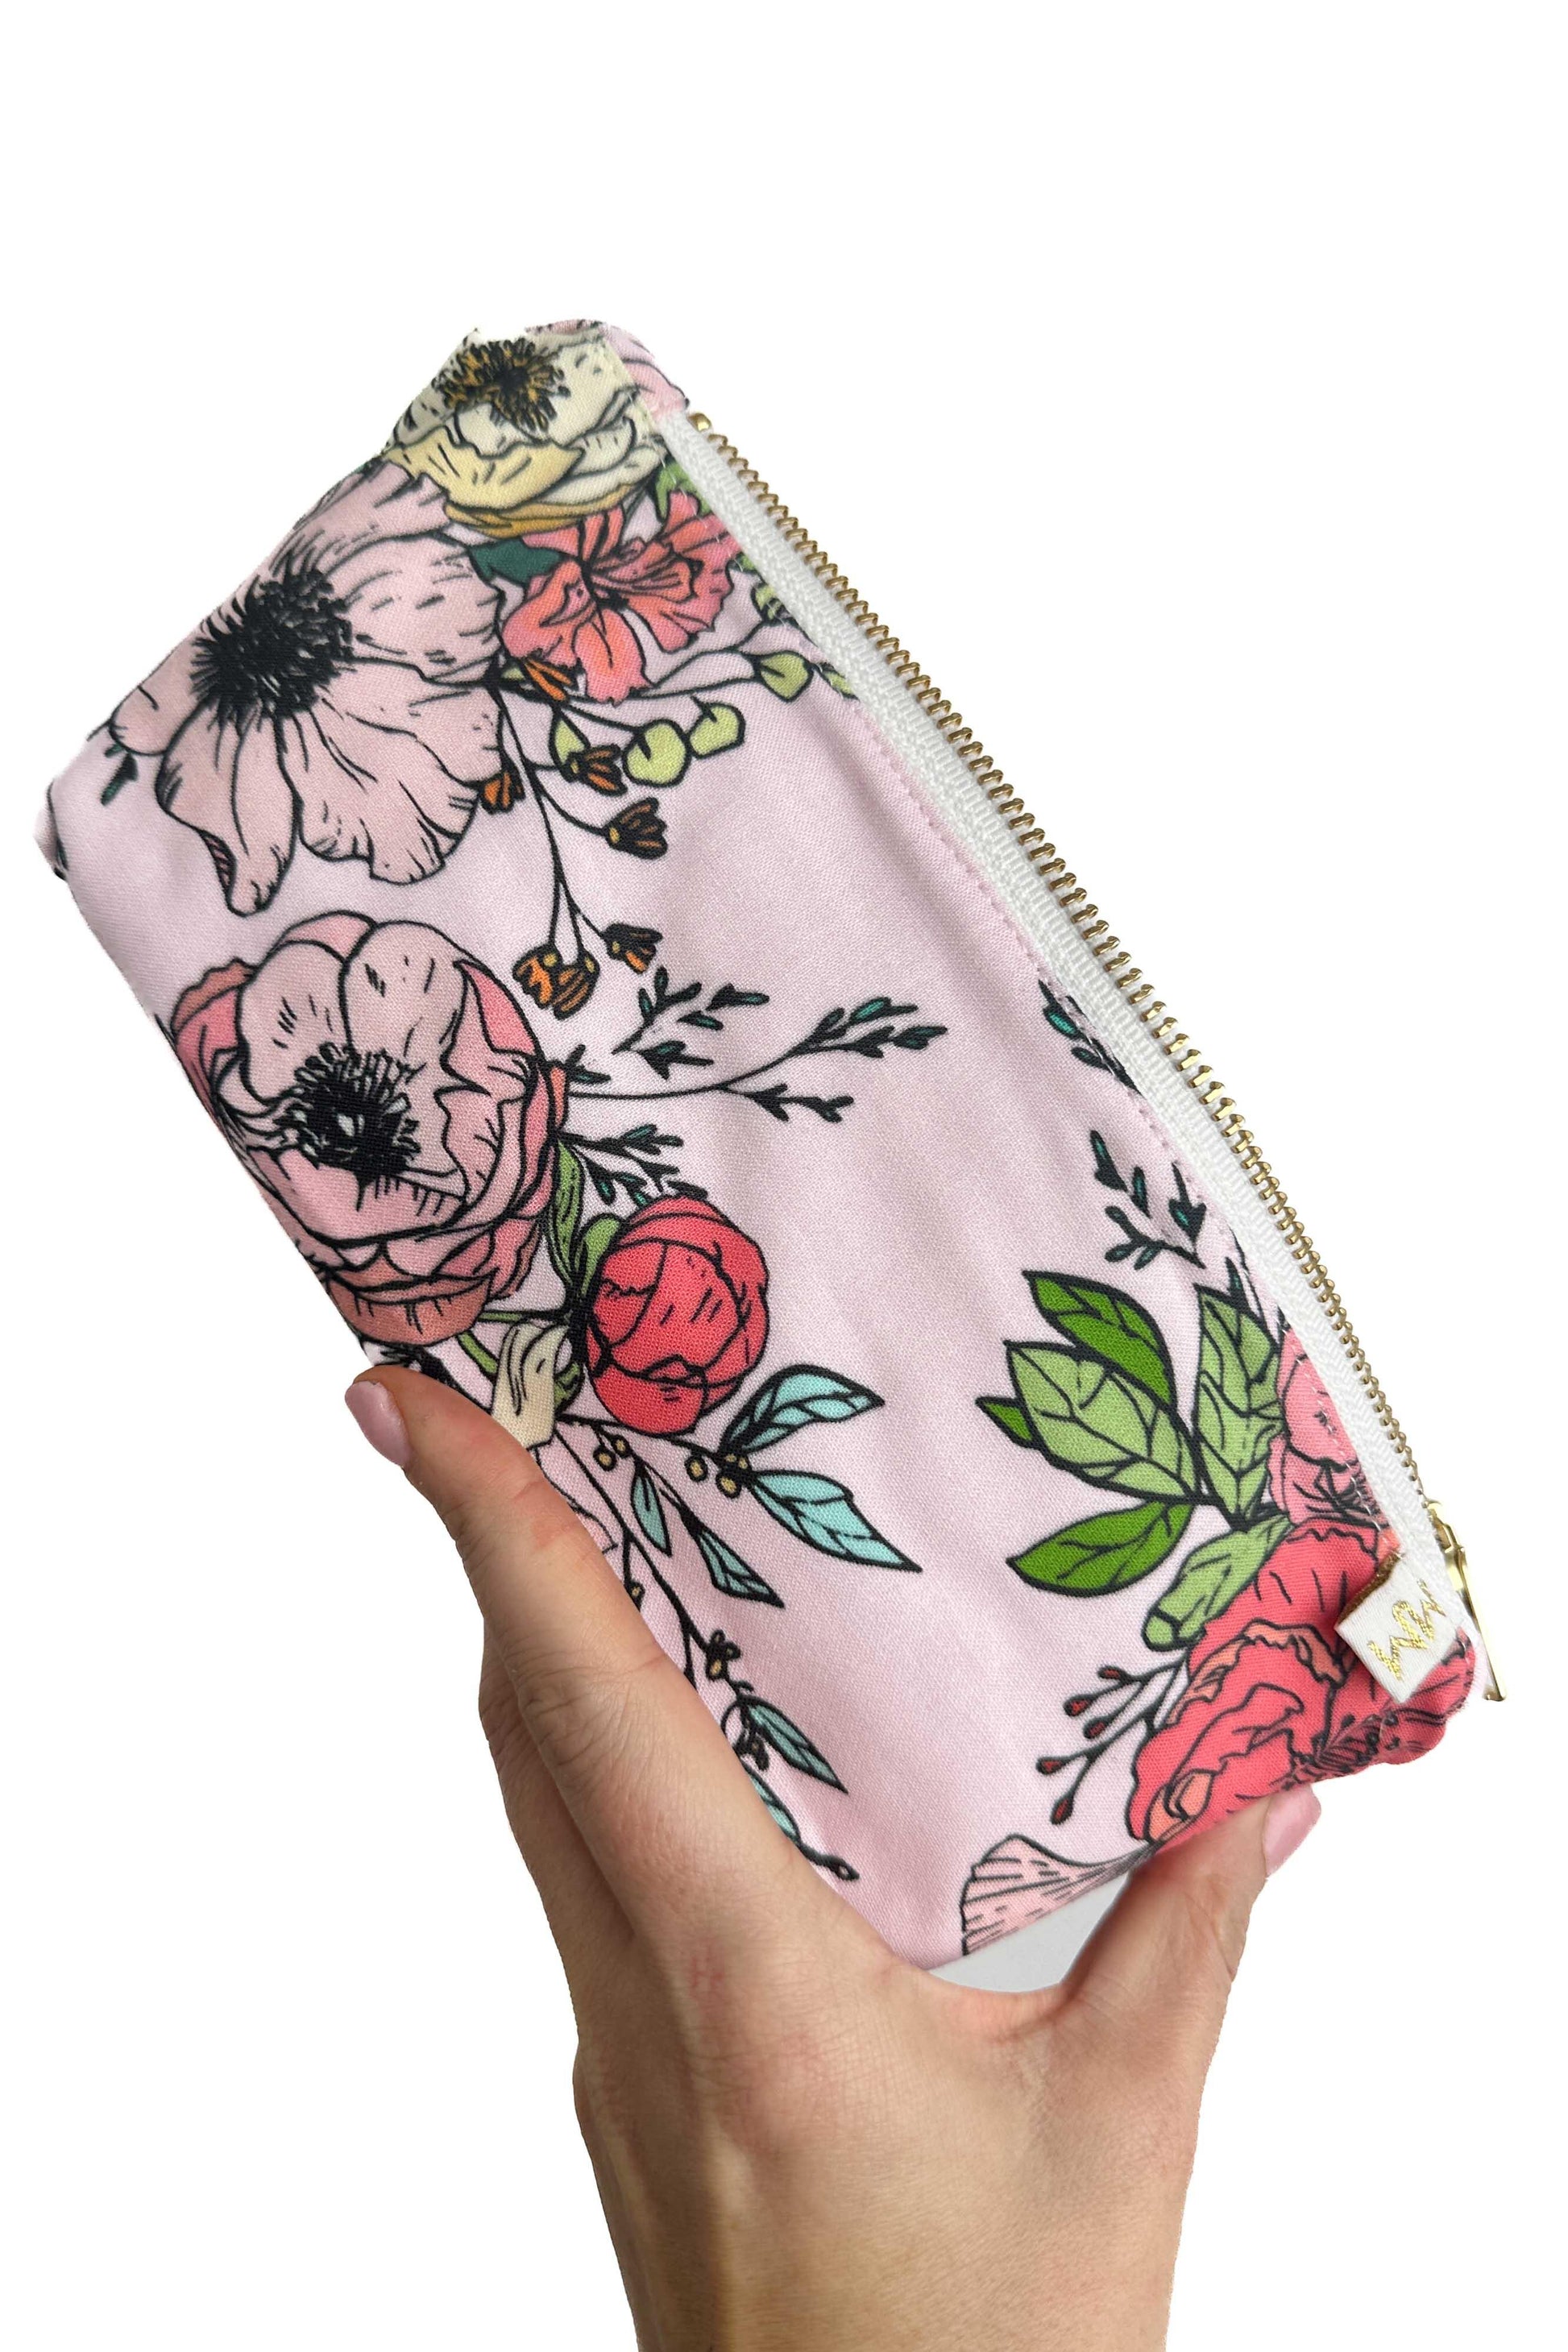 Wild Poppy Stash Travel Bag with Compartments READY TO SHIP - Modern Makerie